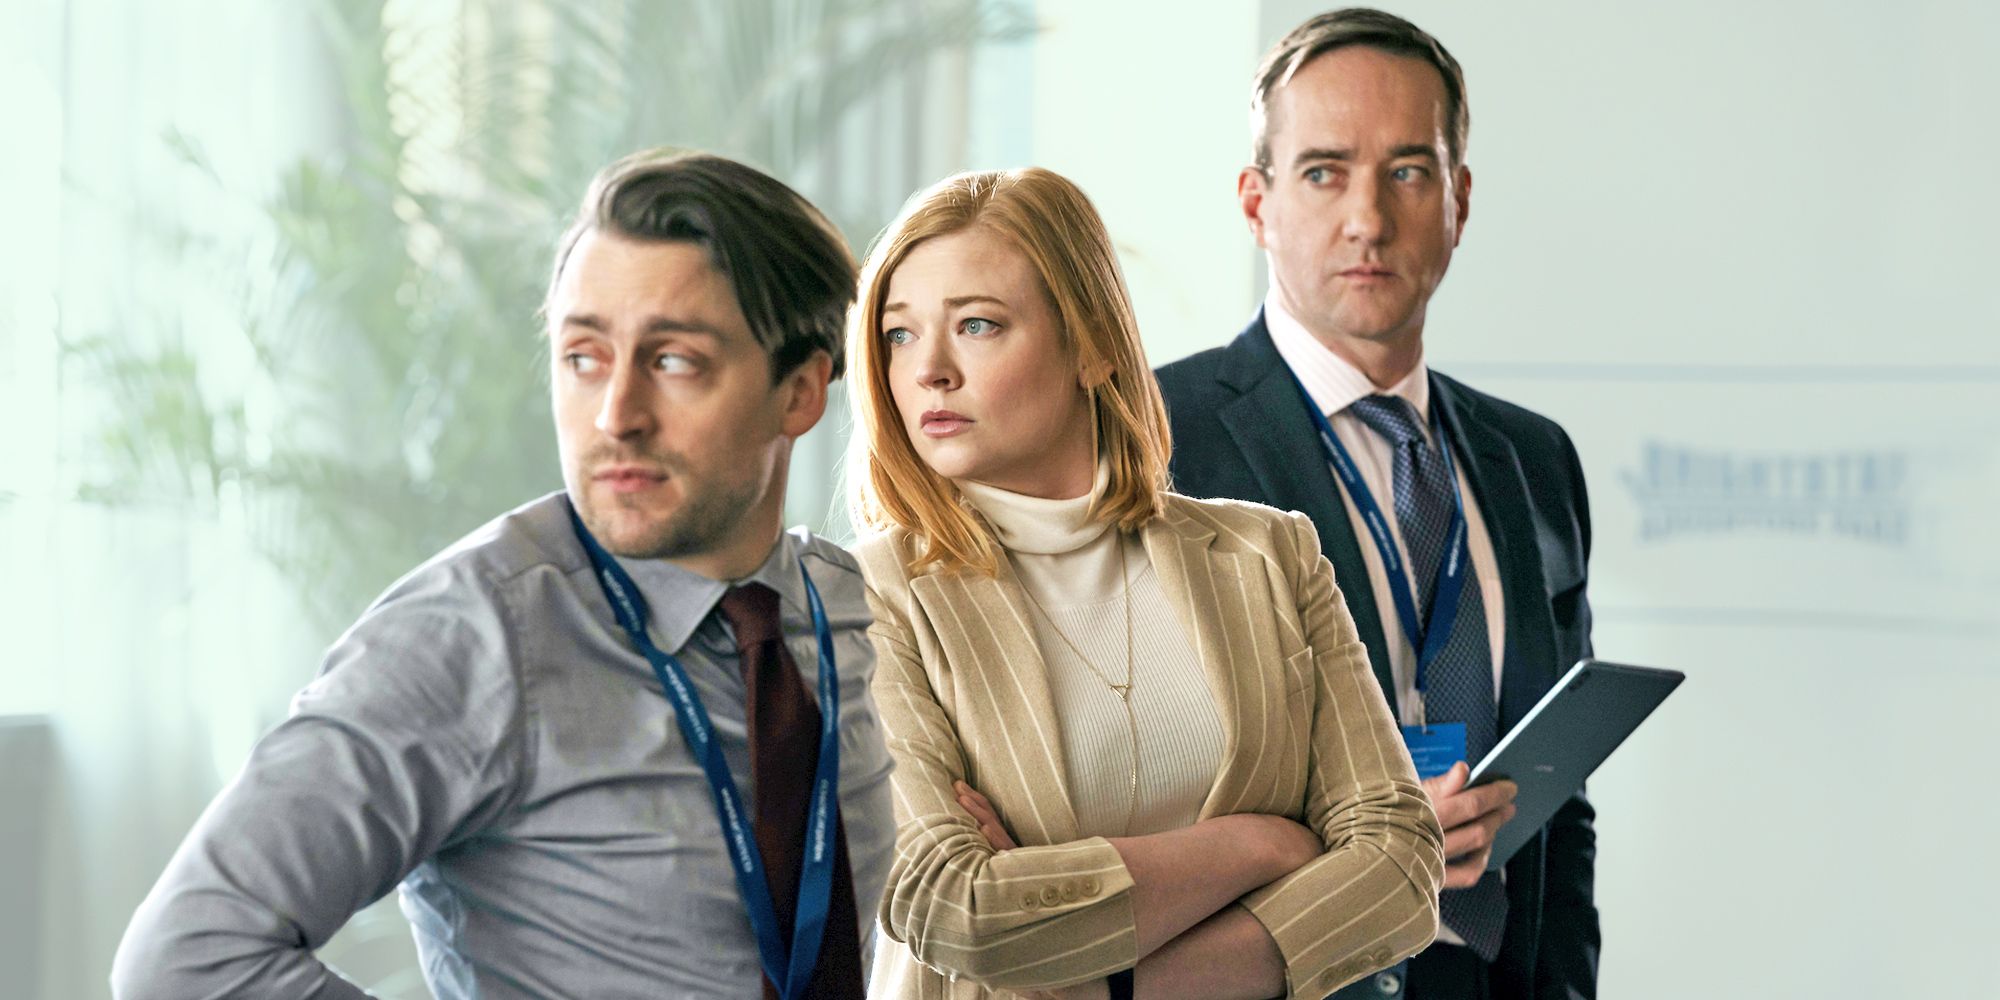 Succession Season 4 Comming This Year(2022) Or No?